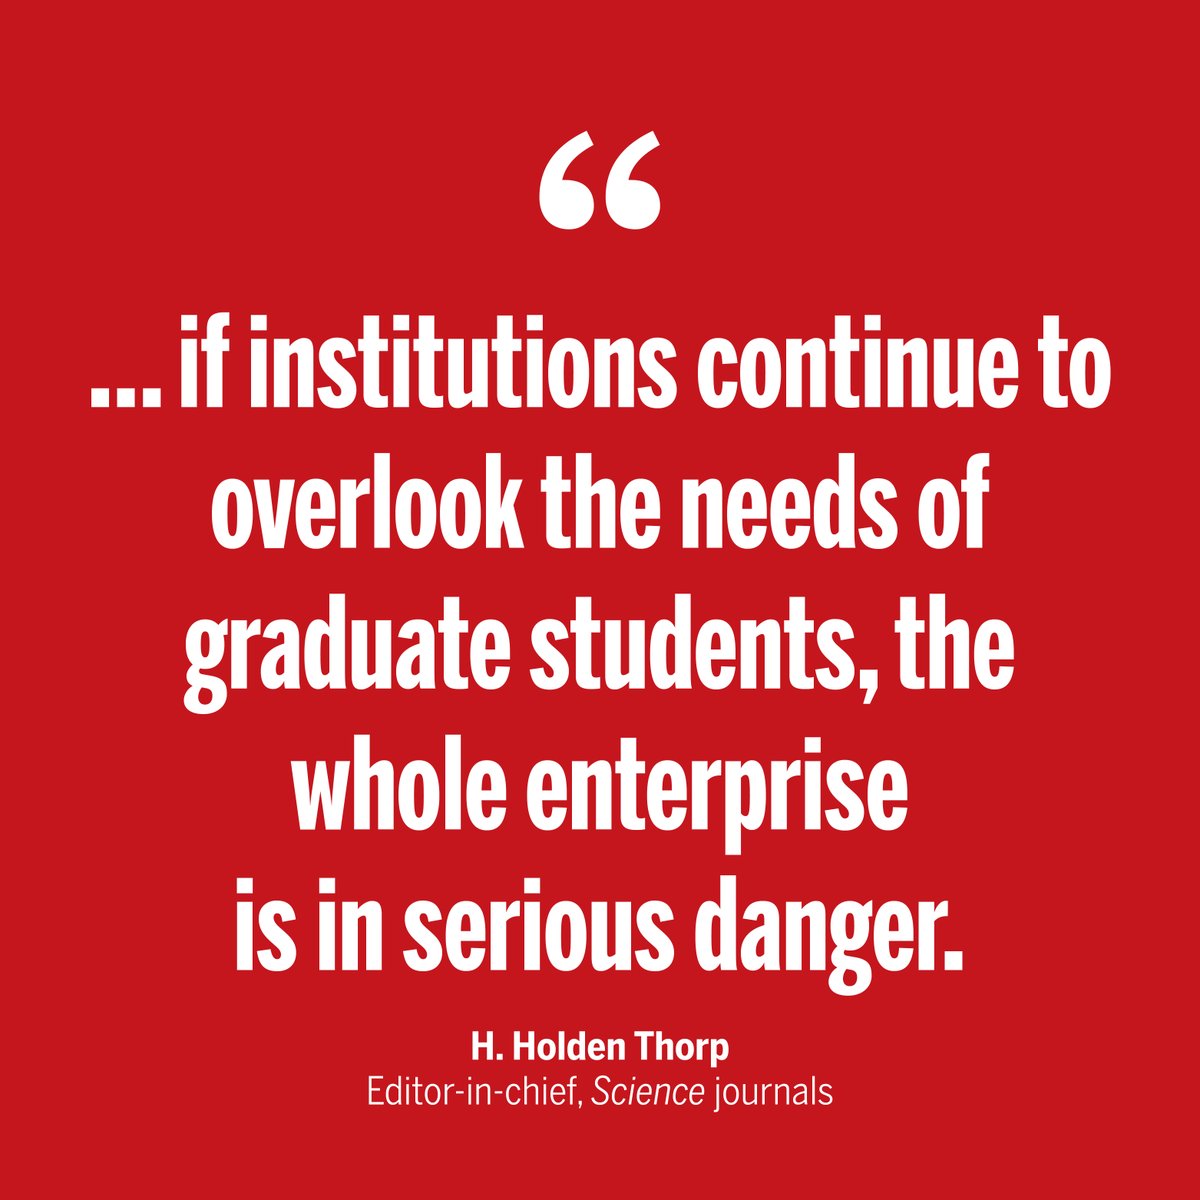 '[I]f institutions continue to overlook the needs of graduate students, the whole enterprise is in serious danger,' writes H. Holden Thorp in a new #ScienceEditorial reflecting on the harms of #ResearchMisconduct on students. scim.ag/6eW